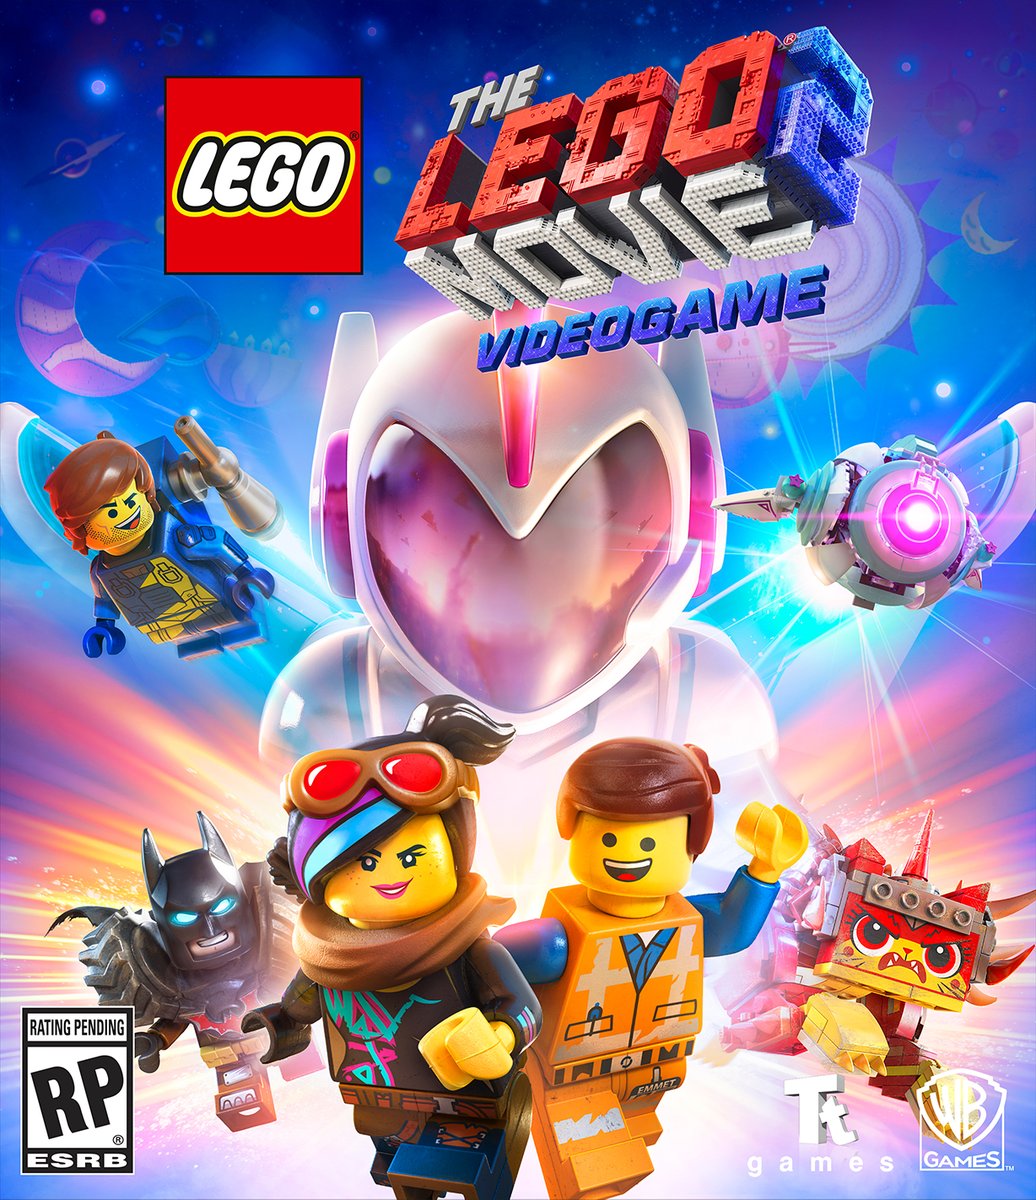 the-lego-movie-2-videogame-announced-for-switch